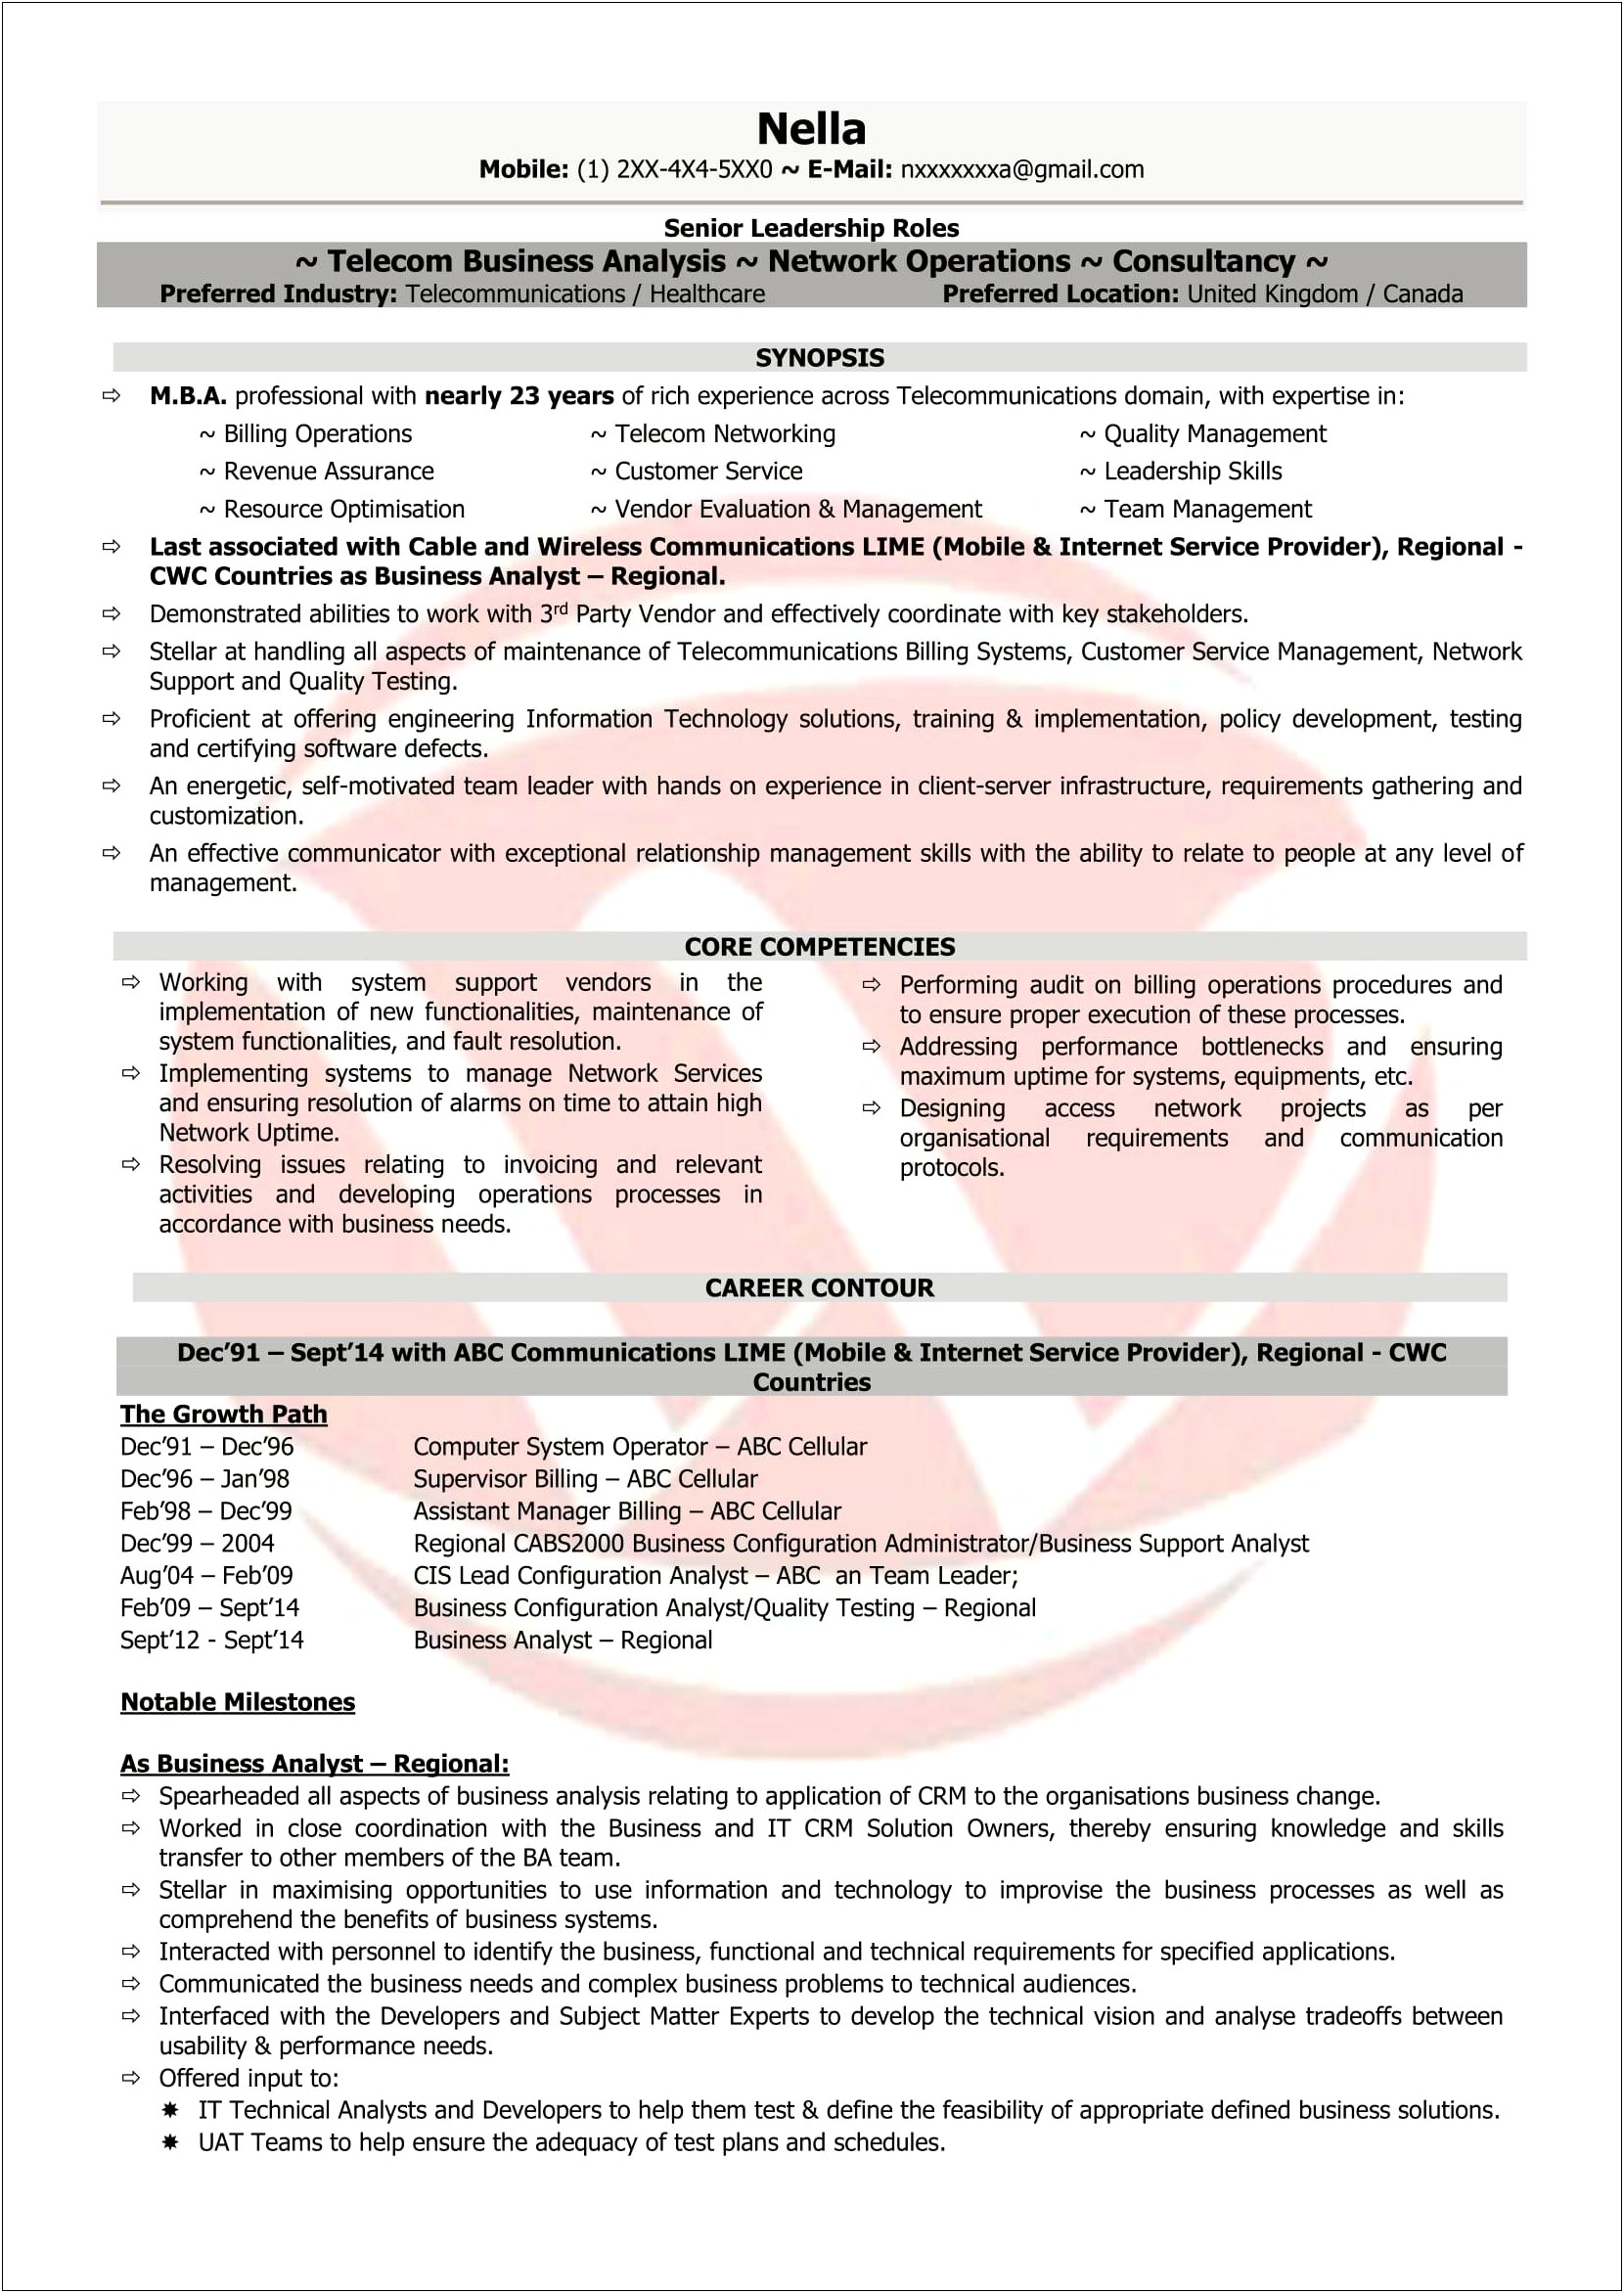 Resume Objective Examples For Telecommunications Manager